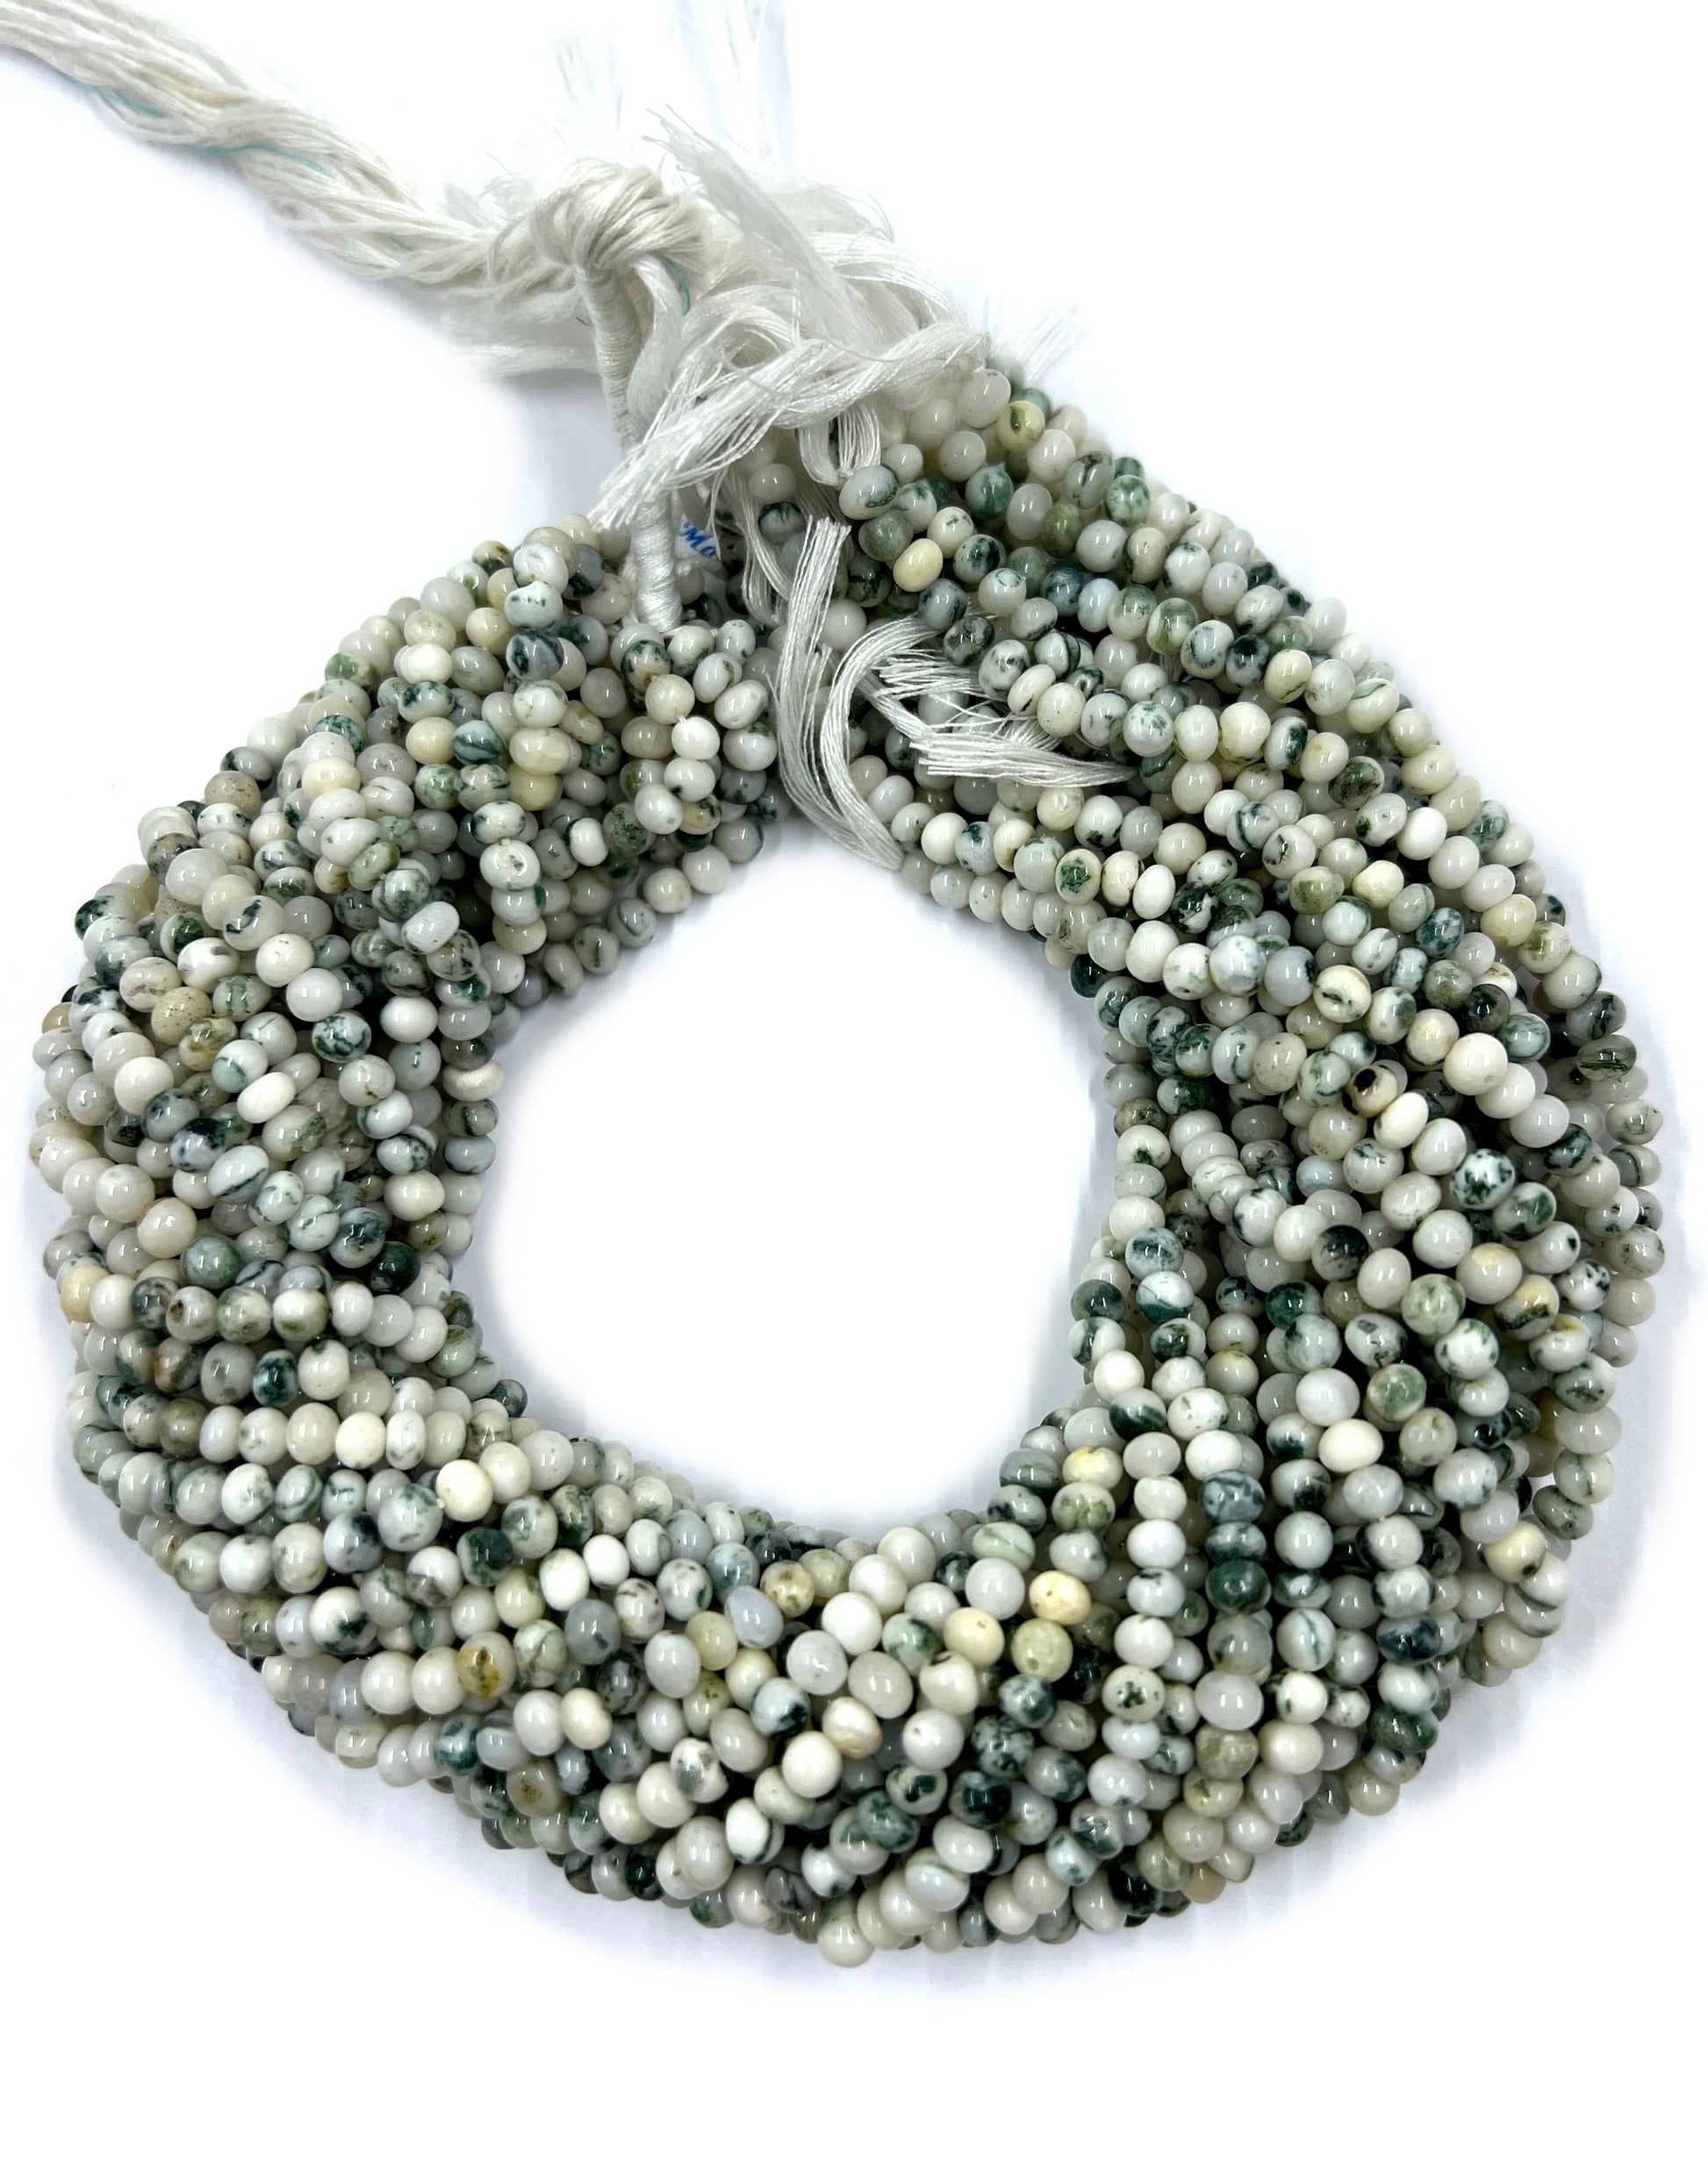 Tree Agate Rondelle Beads